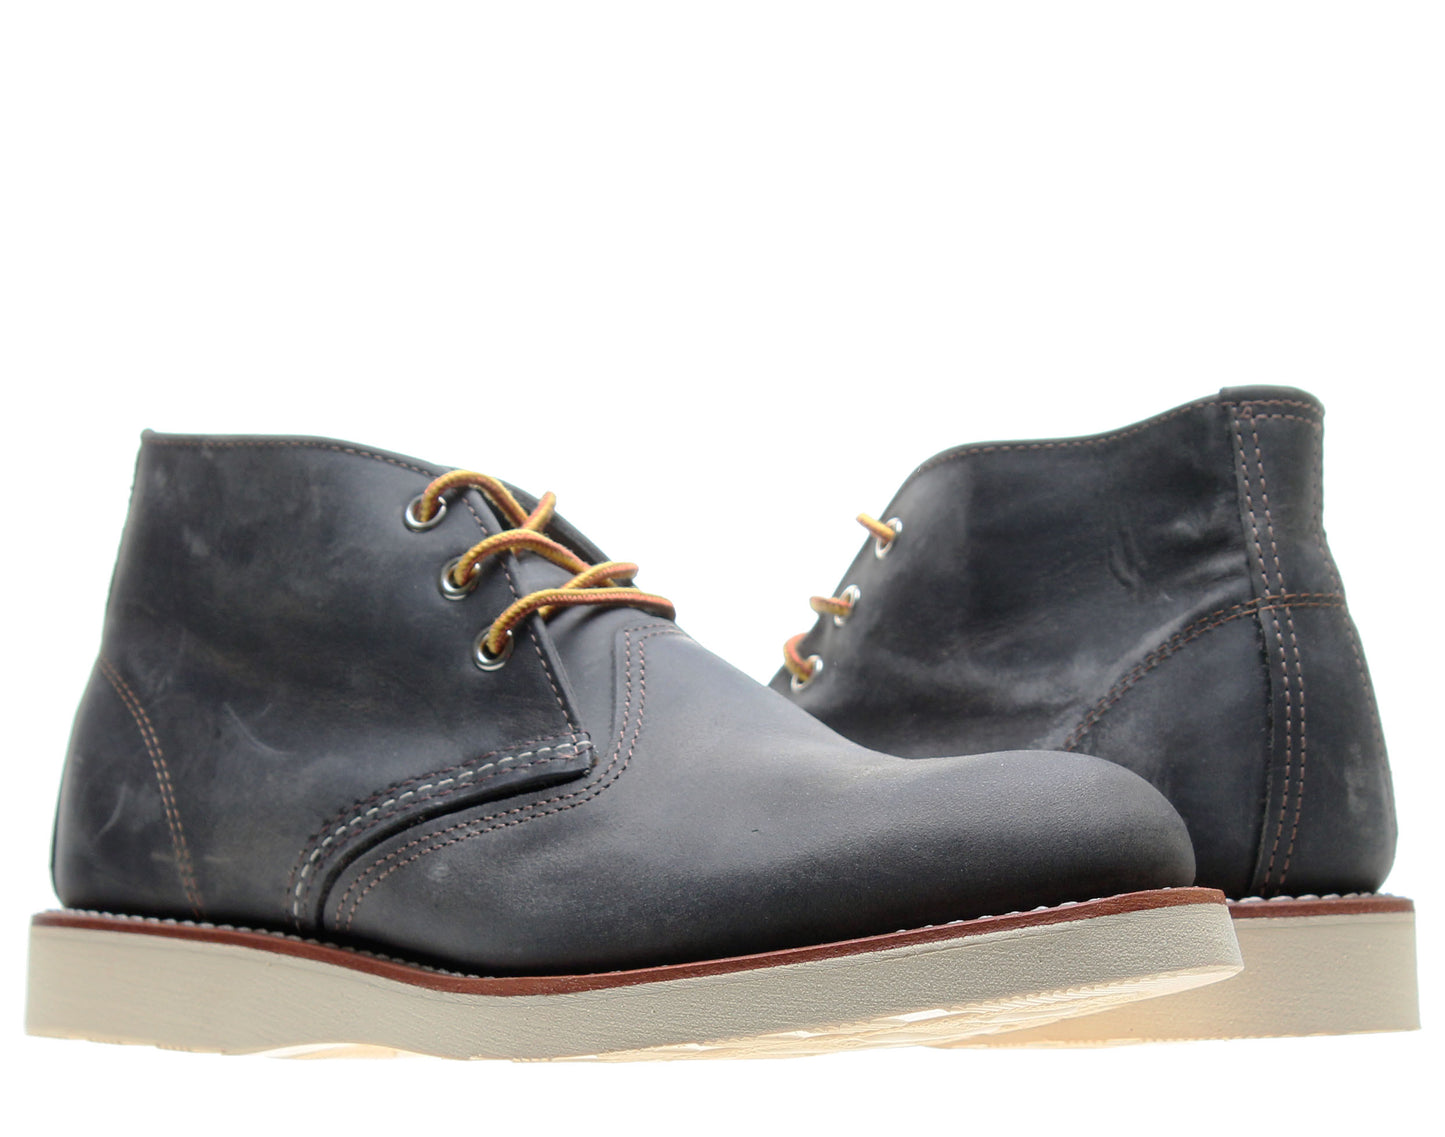 Red Wing Heritage 3138 Classic Chukka Men's Boots